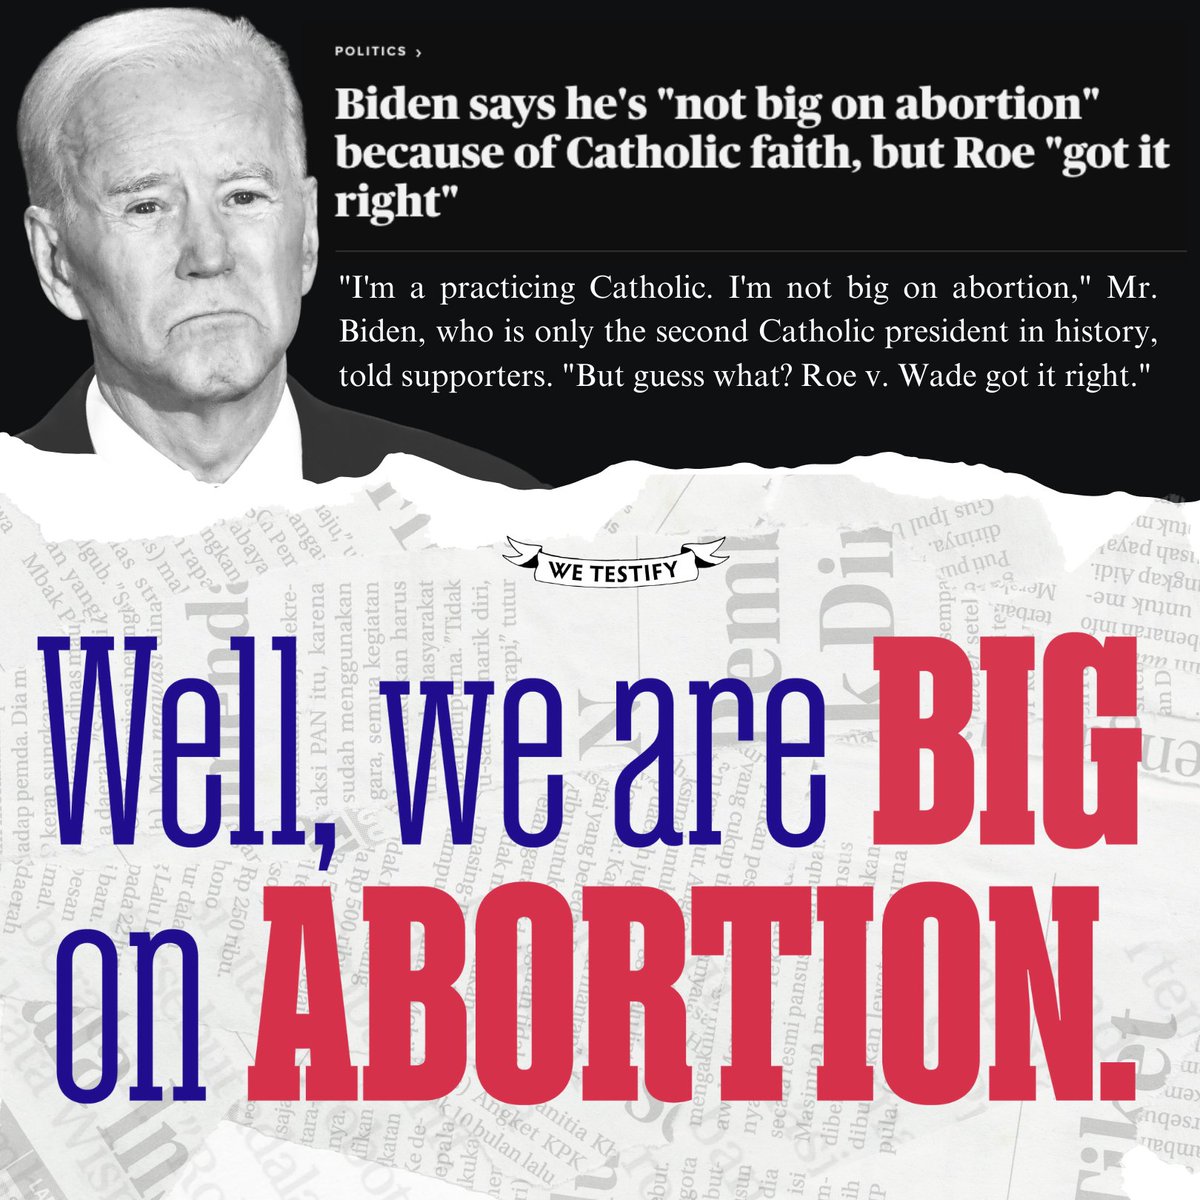 Hey, @POTUS — You may not be 'big on abortion', but we are! Everyone loves someone who has had abortions, and being “big” on abortion means showing up for the people we love.

Show up for people who have abortions, Joe.